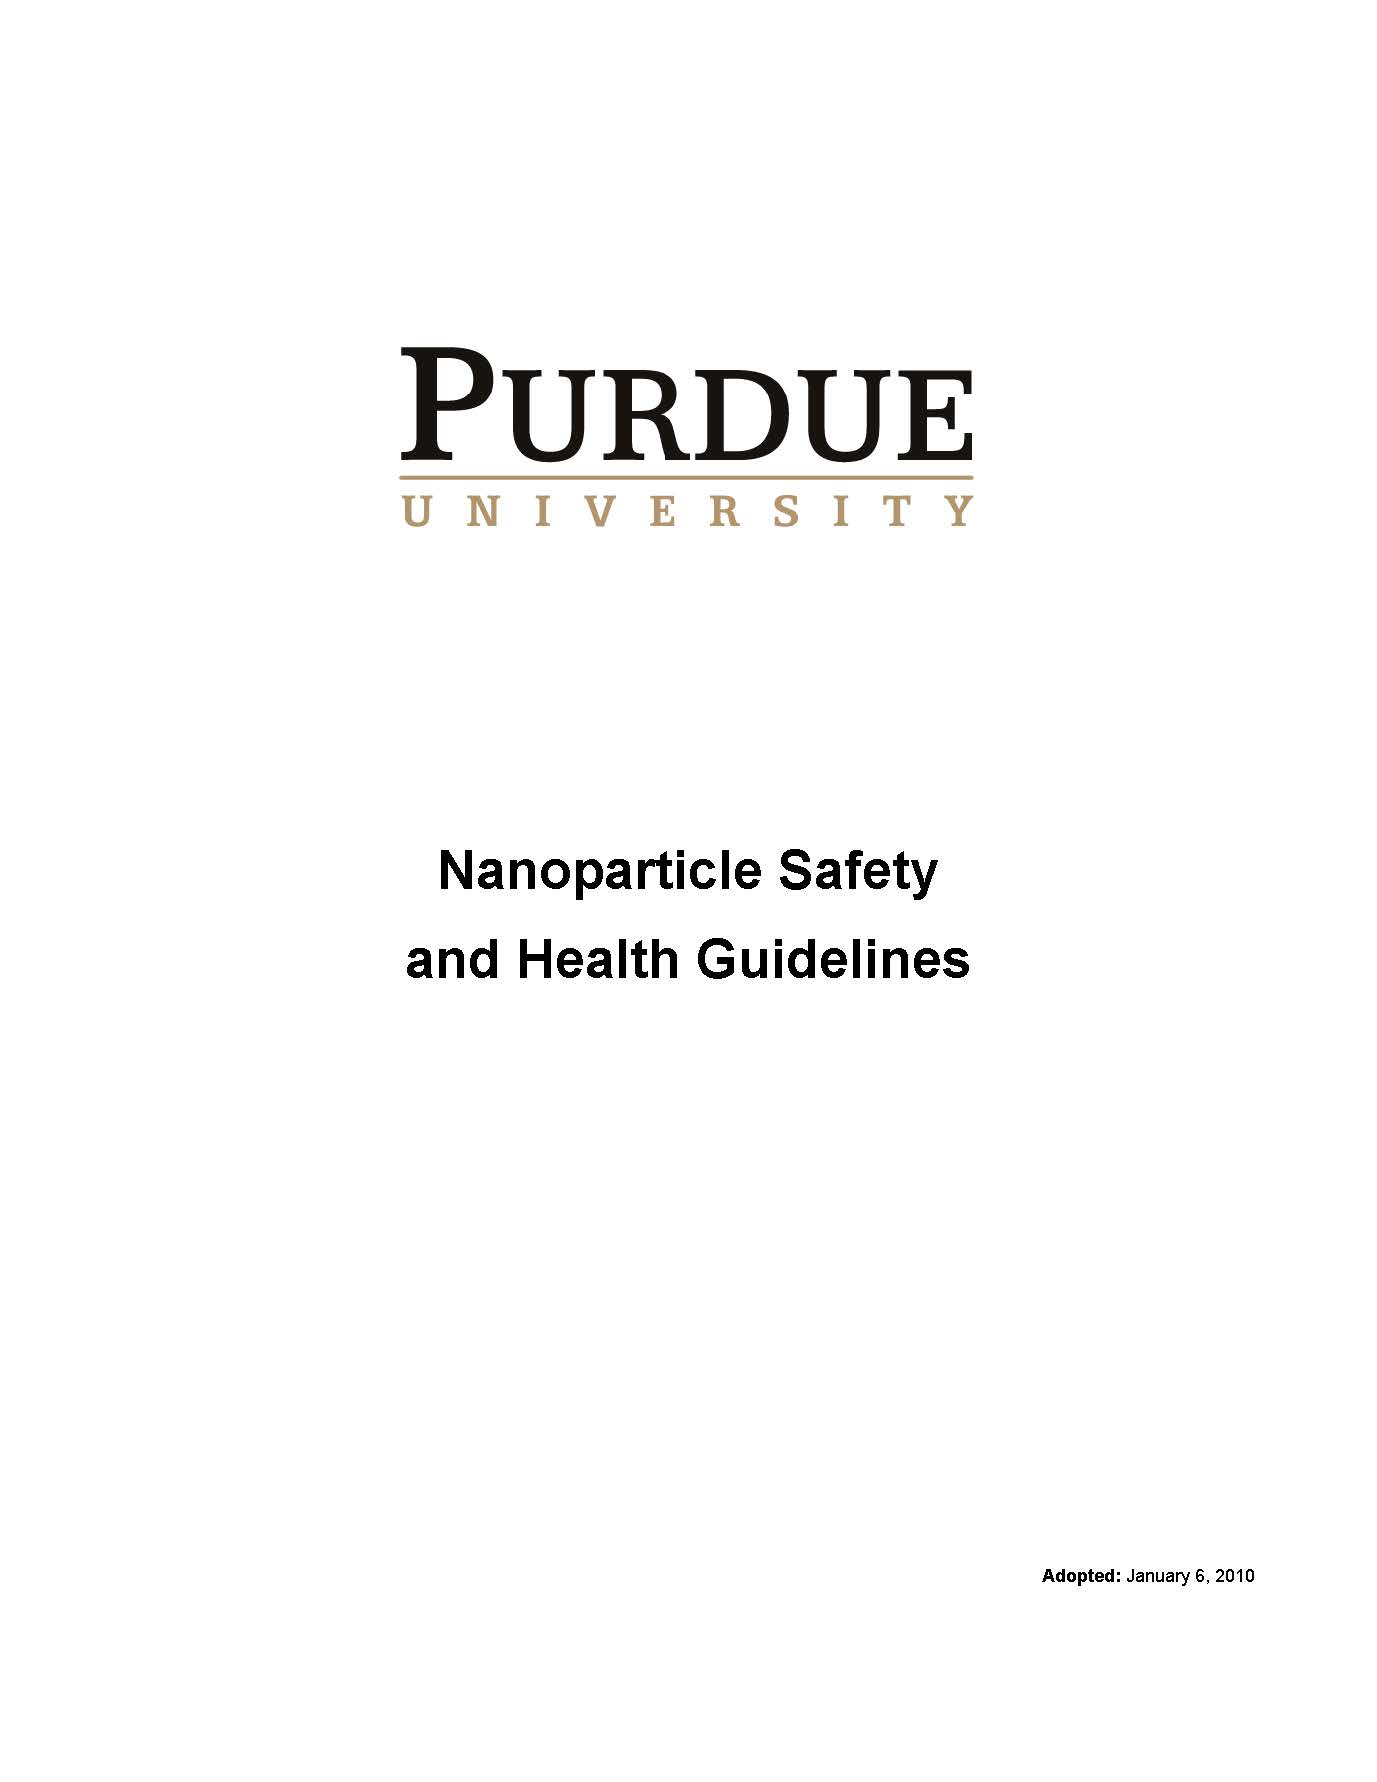 link to nanoparticle safety and health guidelines